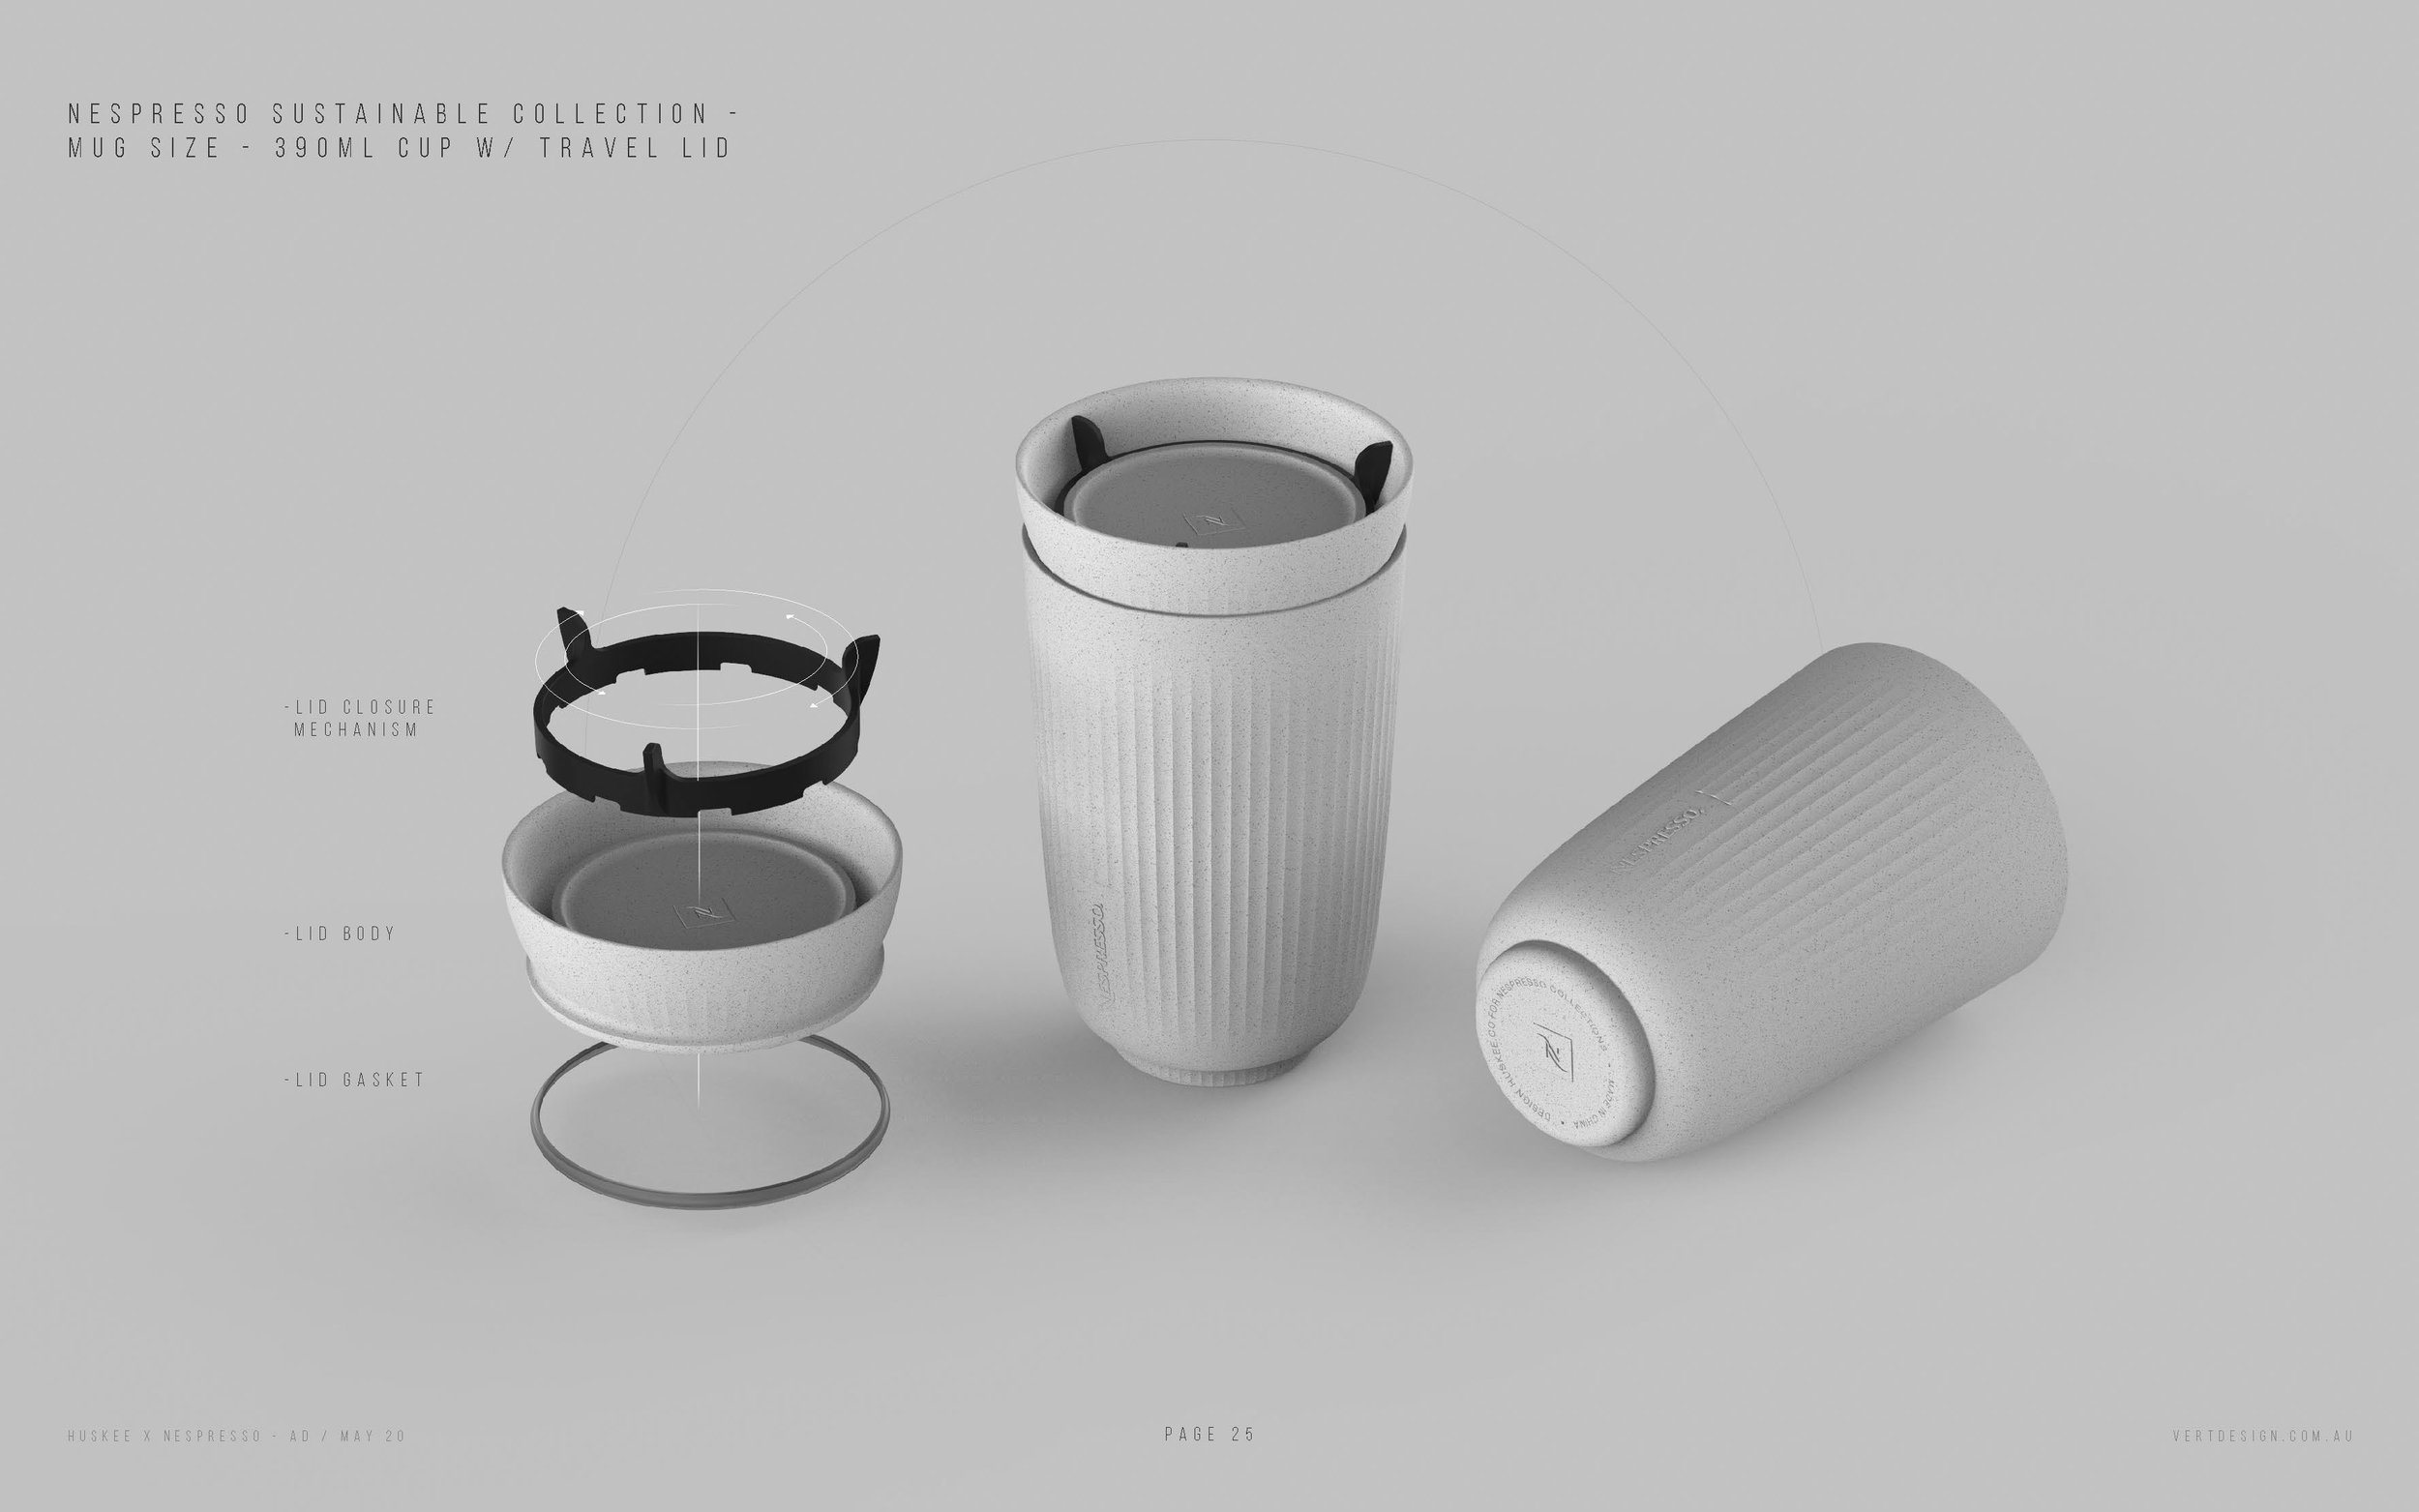 HUSKEE + NESPRESSO AD - SUSTAINABLE COLLECTION CONCEPT DESIGN REFINEMNT_R2.1_010520_Page_26.jpg